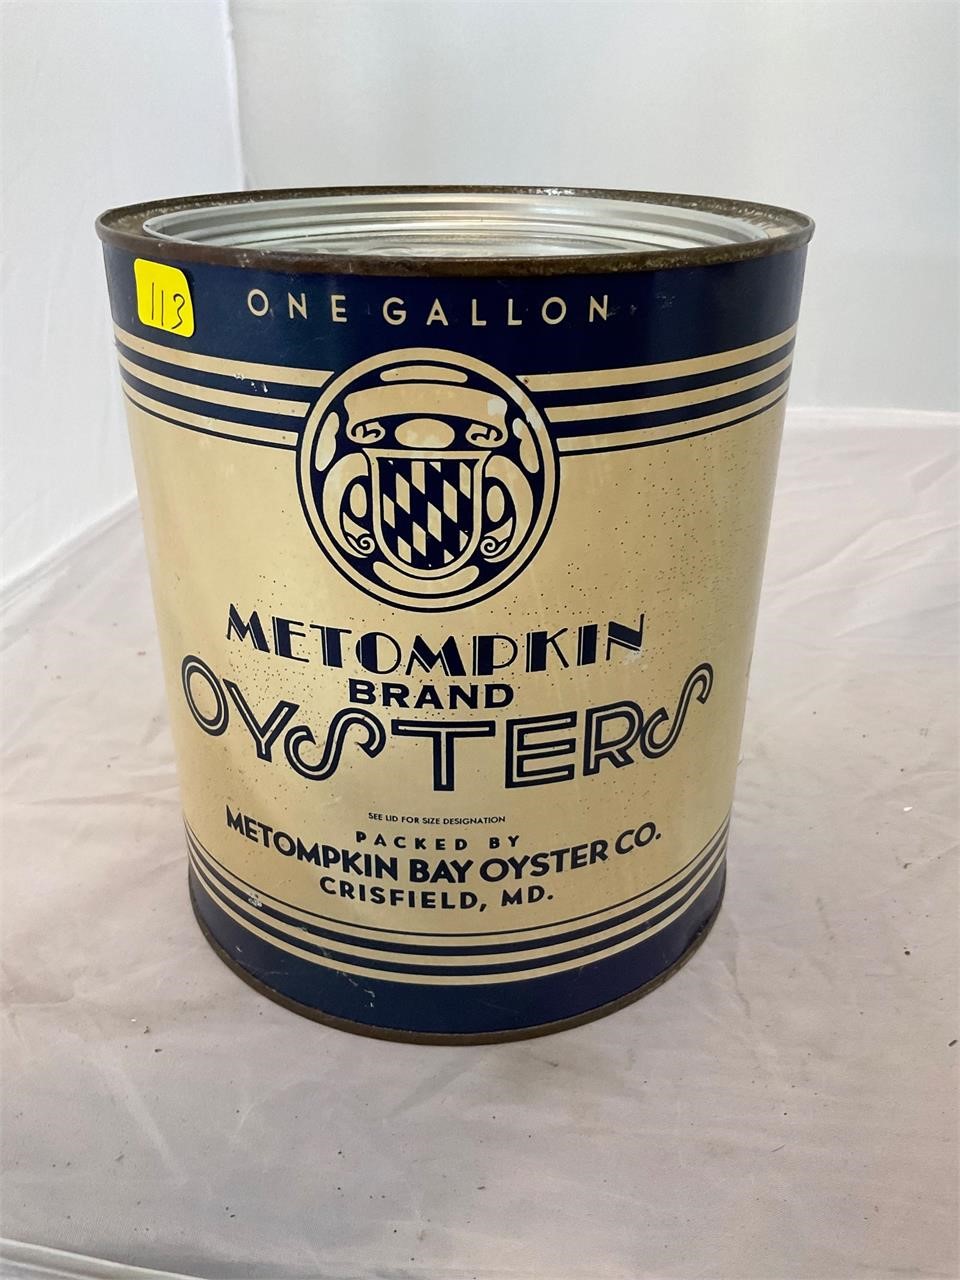 Metompkin Bay Oyster Co Crisfield Md Gallon Oyster